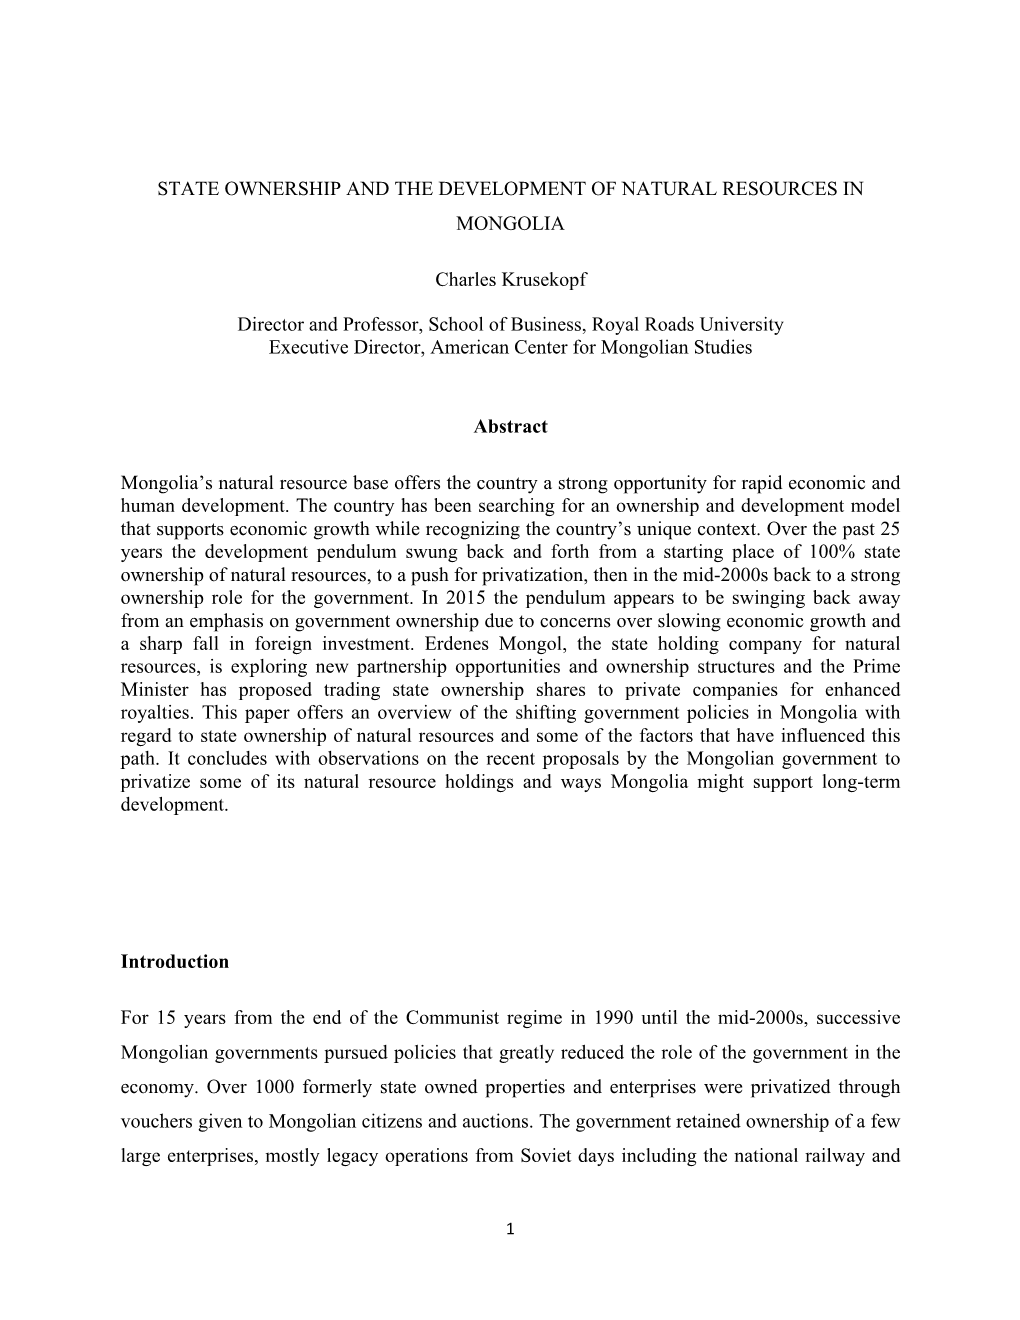 State Ownership and the Development of Natural Resources in Mongolia